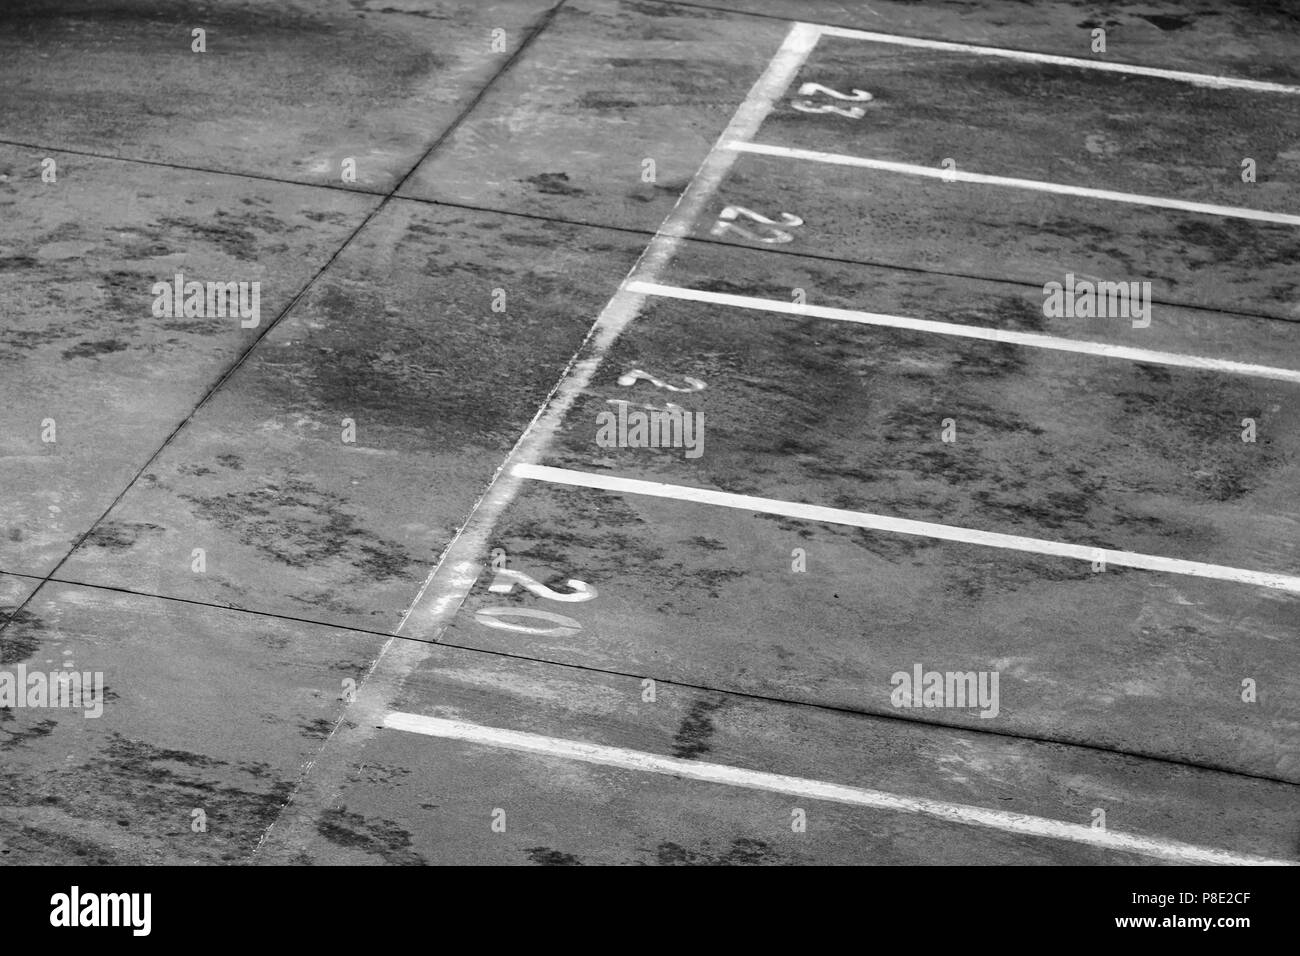 Ferry terminal loading port area, road marking with lane numbers and dividing lines on dirty gray asphalt Stock Photo